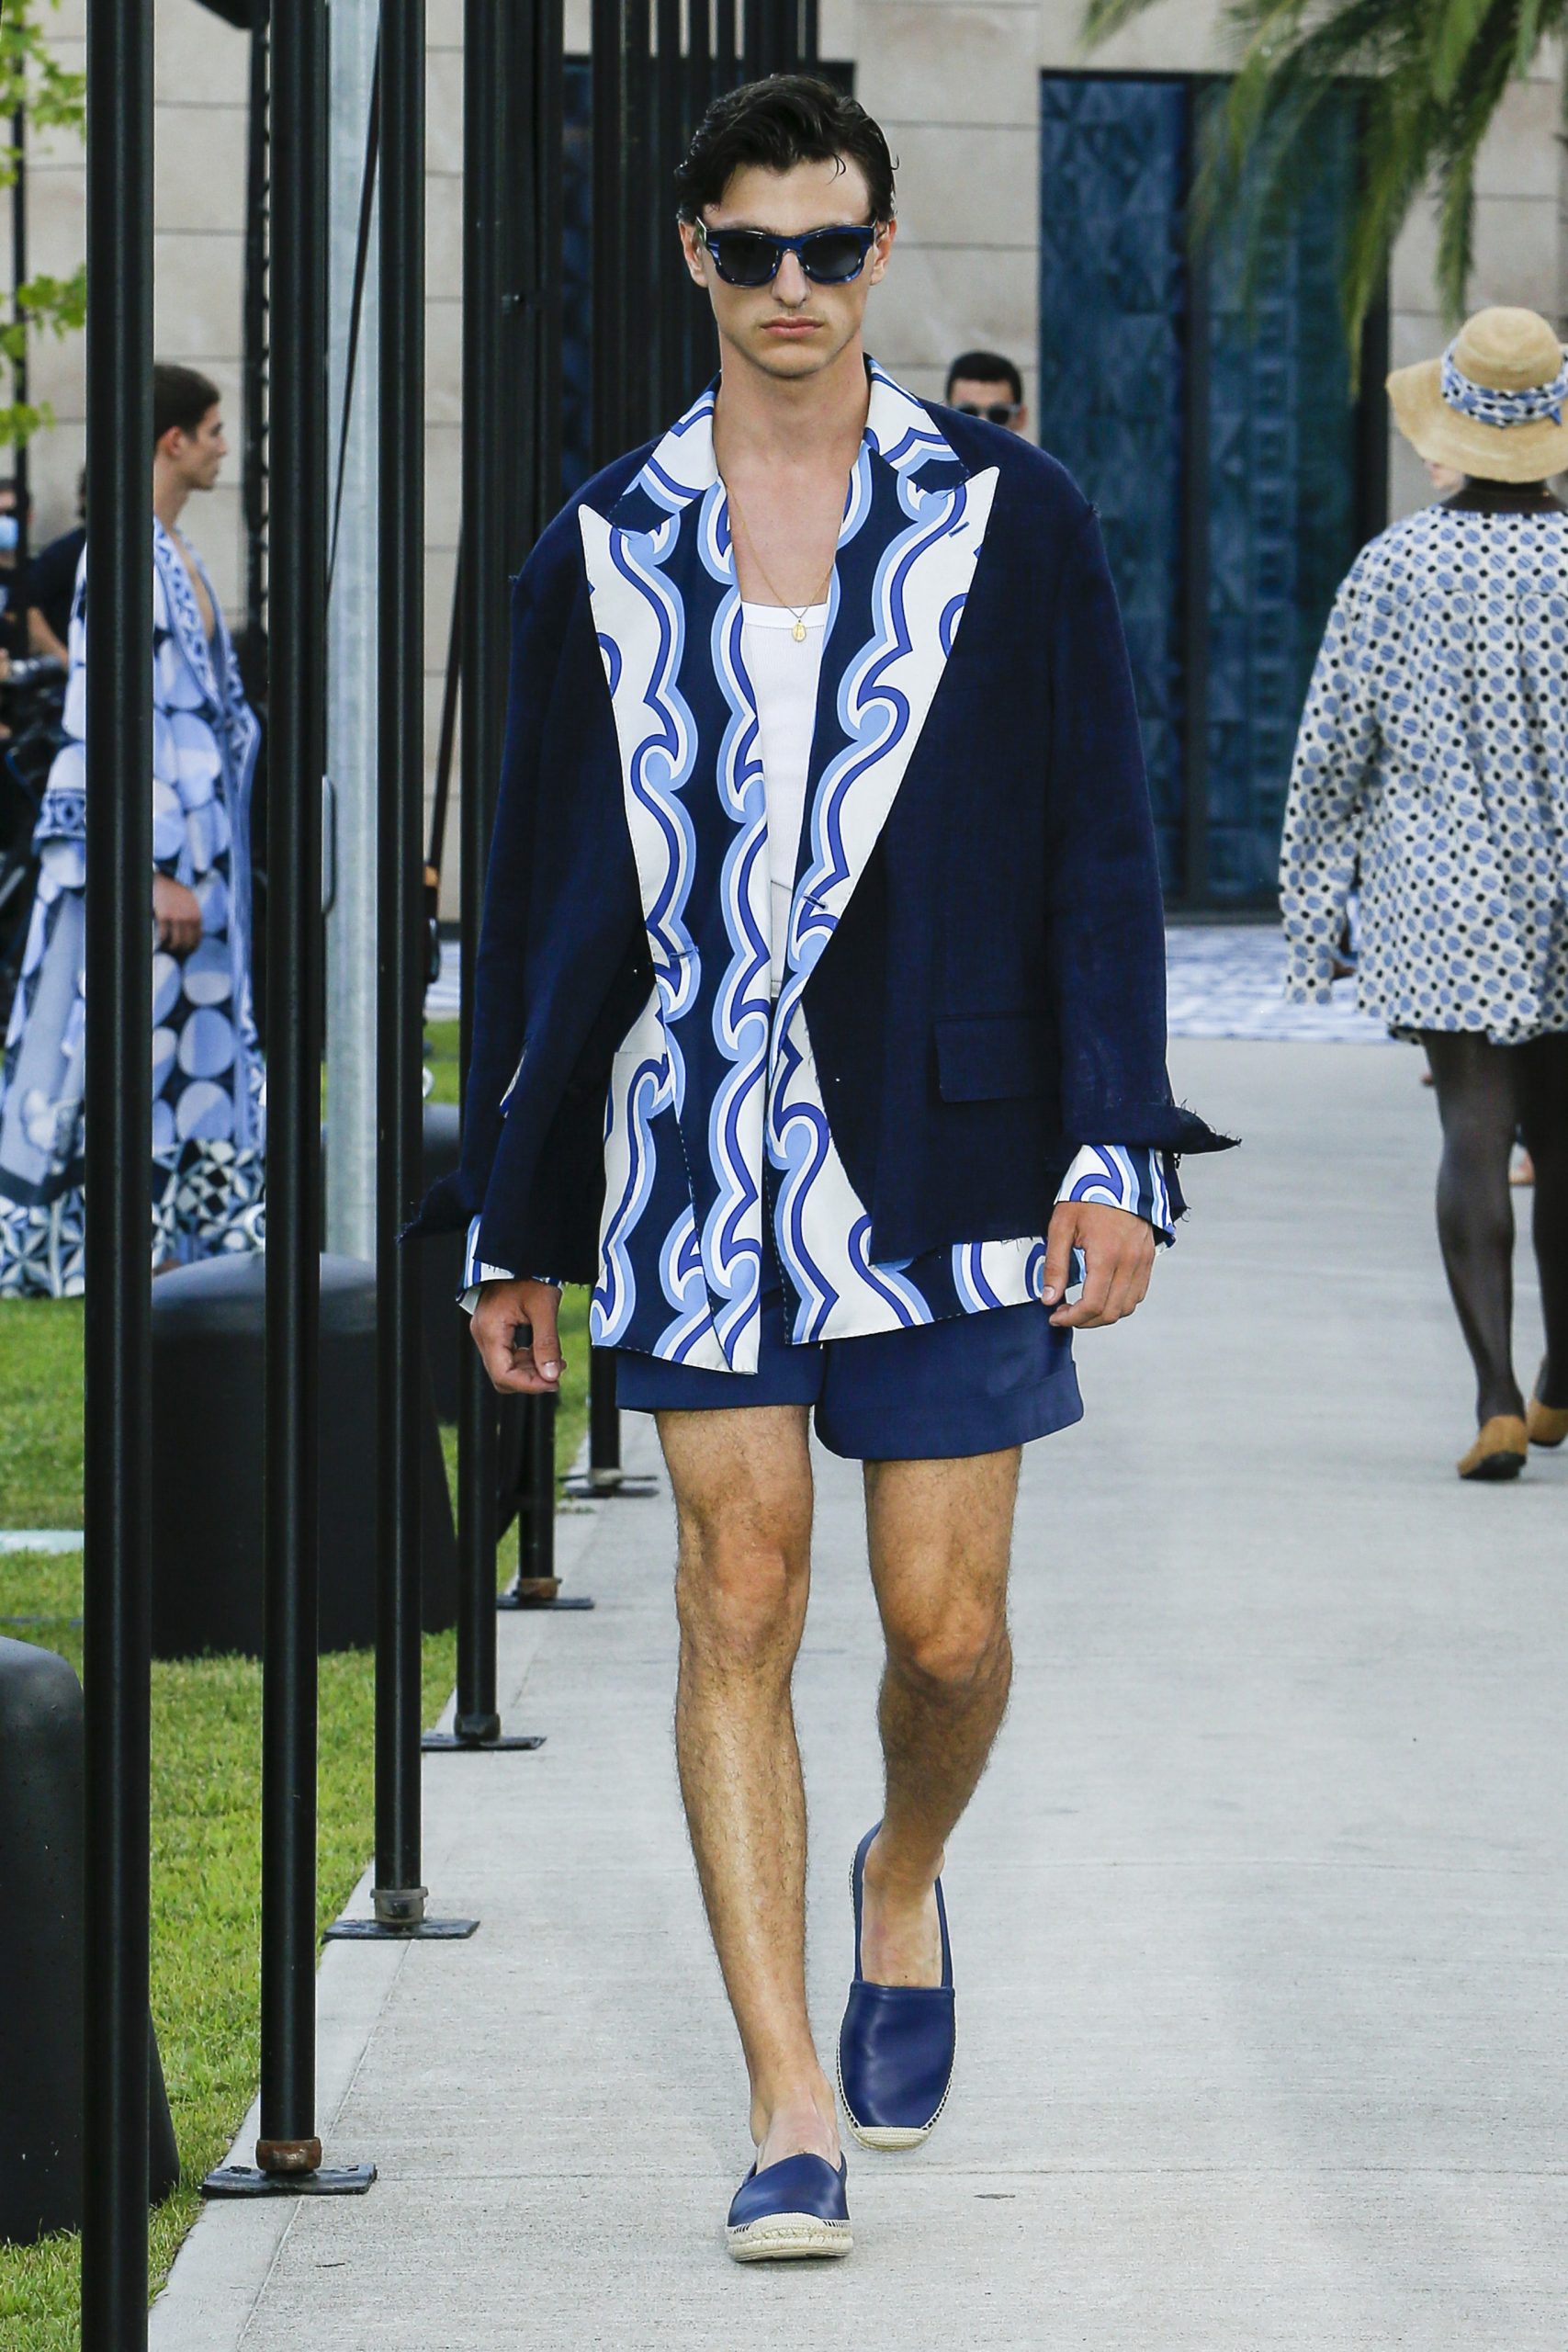 Dolce & Gabbana Spring 2021 Men's Fashion Show Review | The Impression